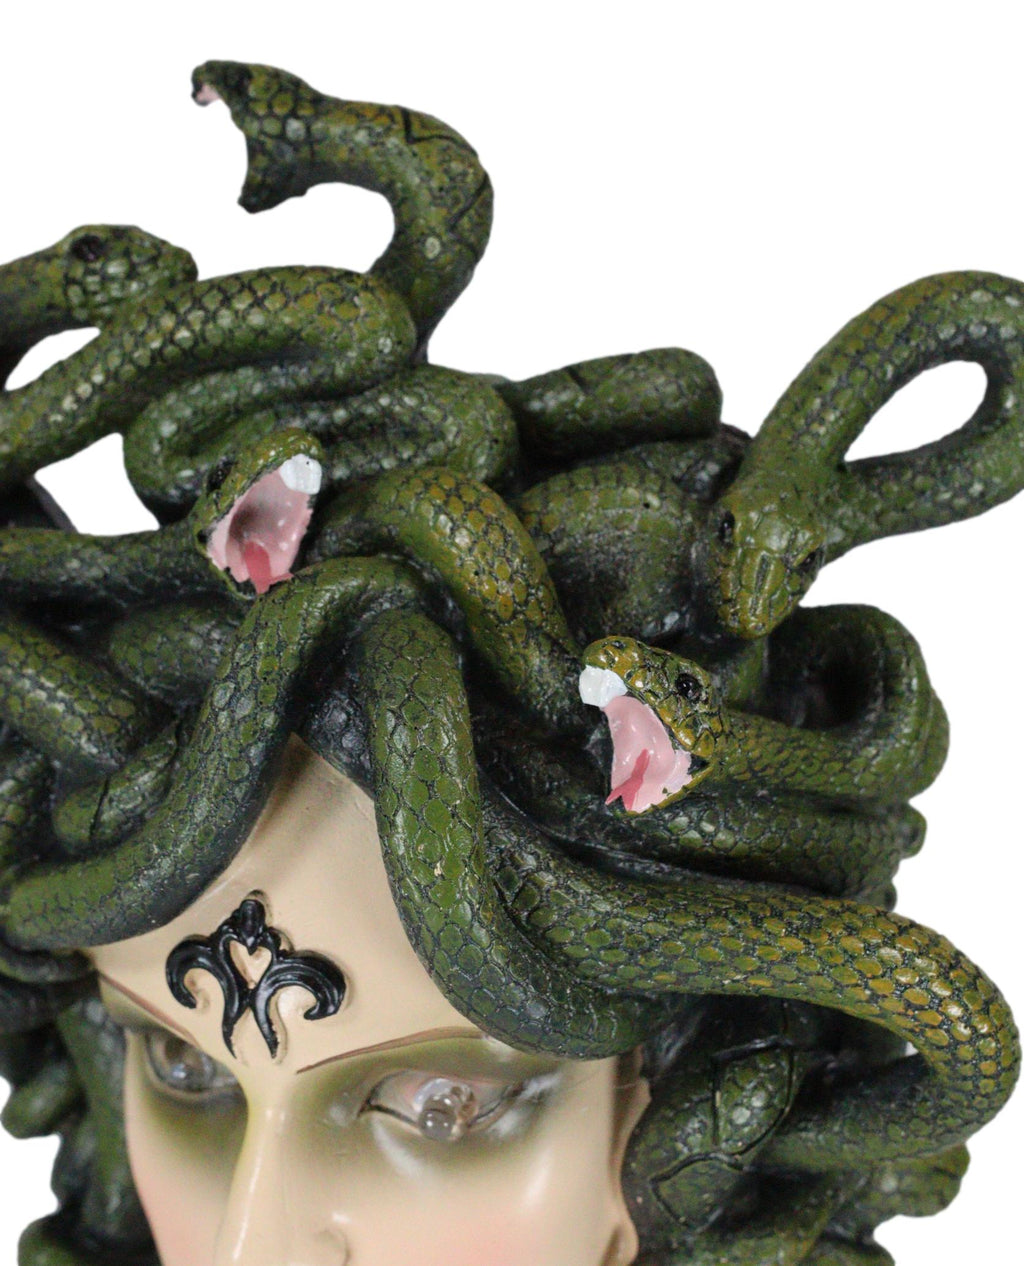 Ebros Gift Greek Mythology Gorgon Sisters Goddess Medusa with Wild Snakes  Hair and Armored Scales Skin Bust Statue 10 Tall Temptation Seduction of